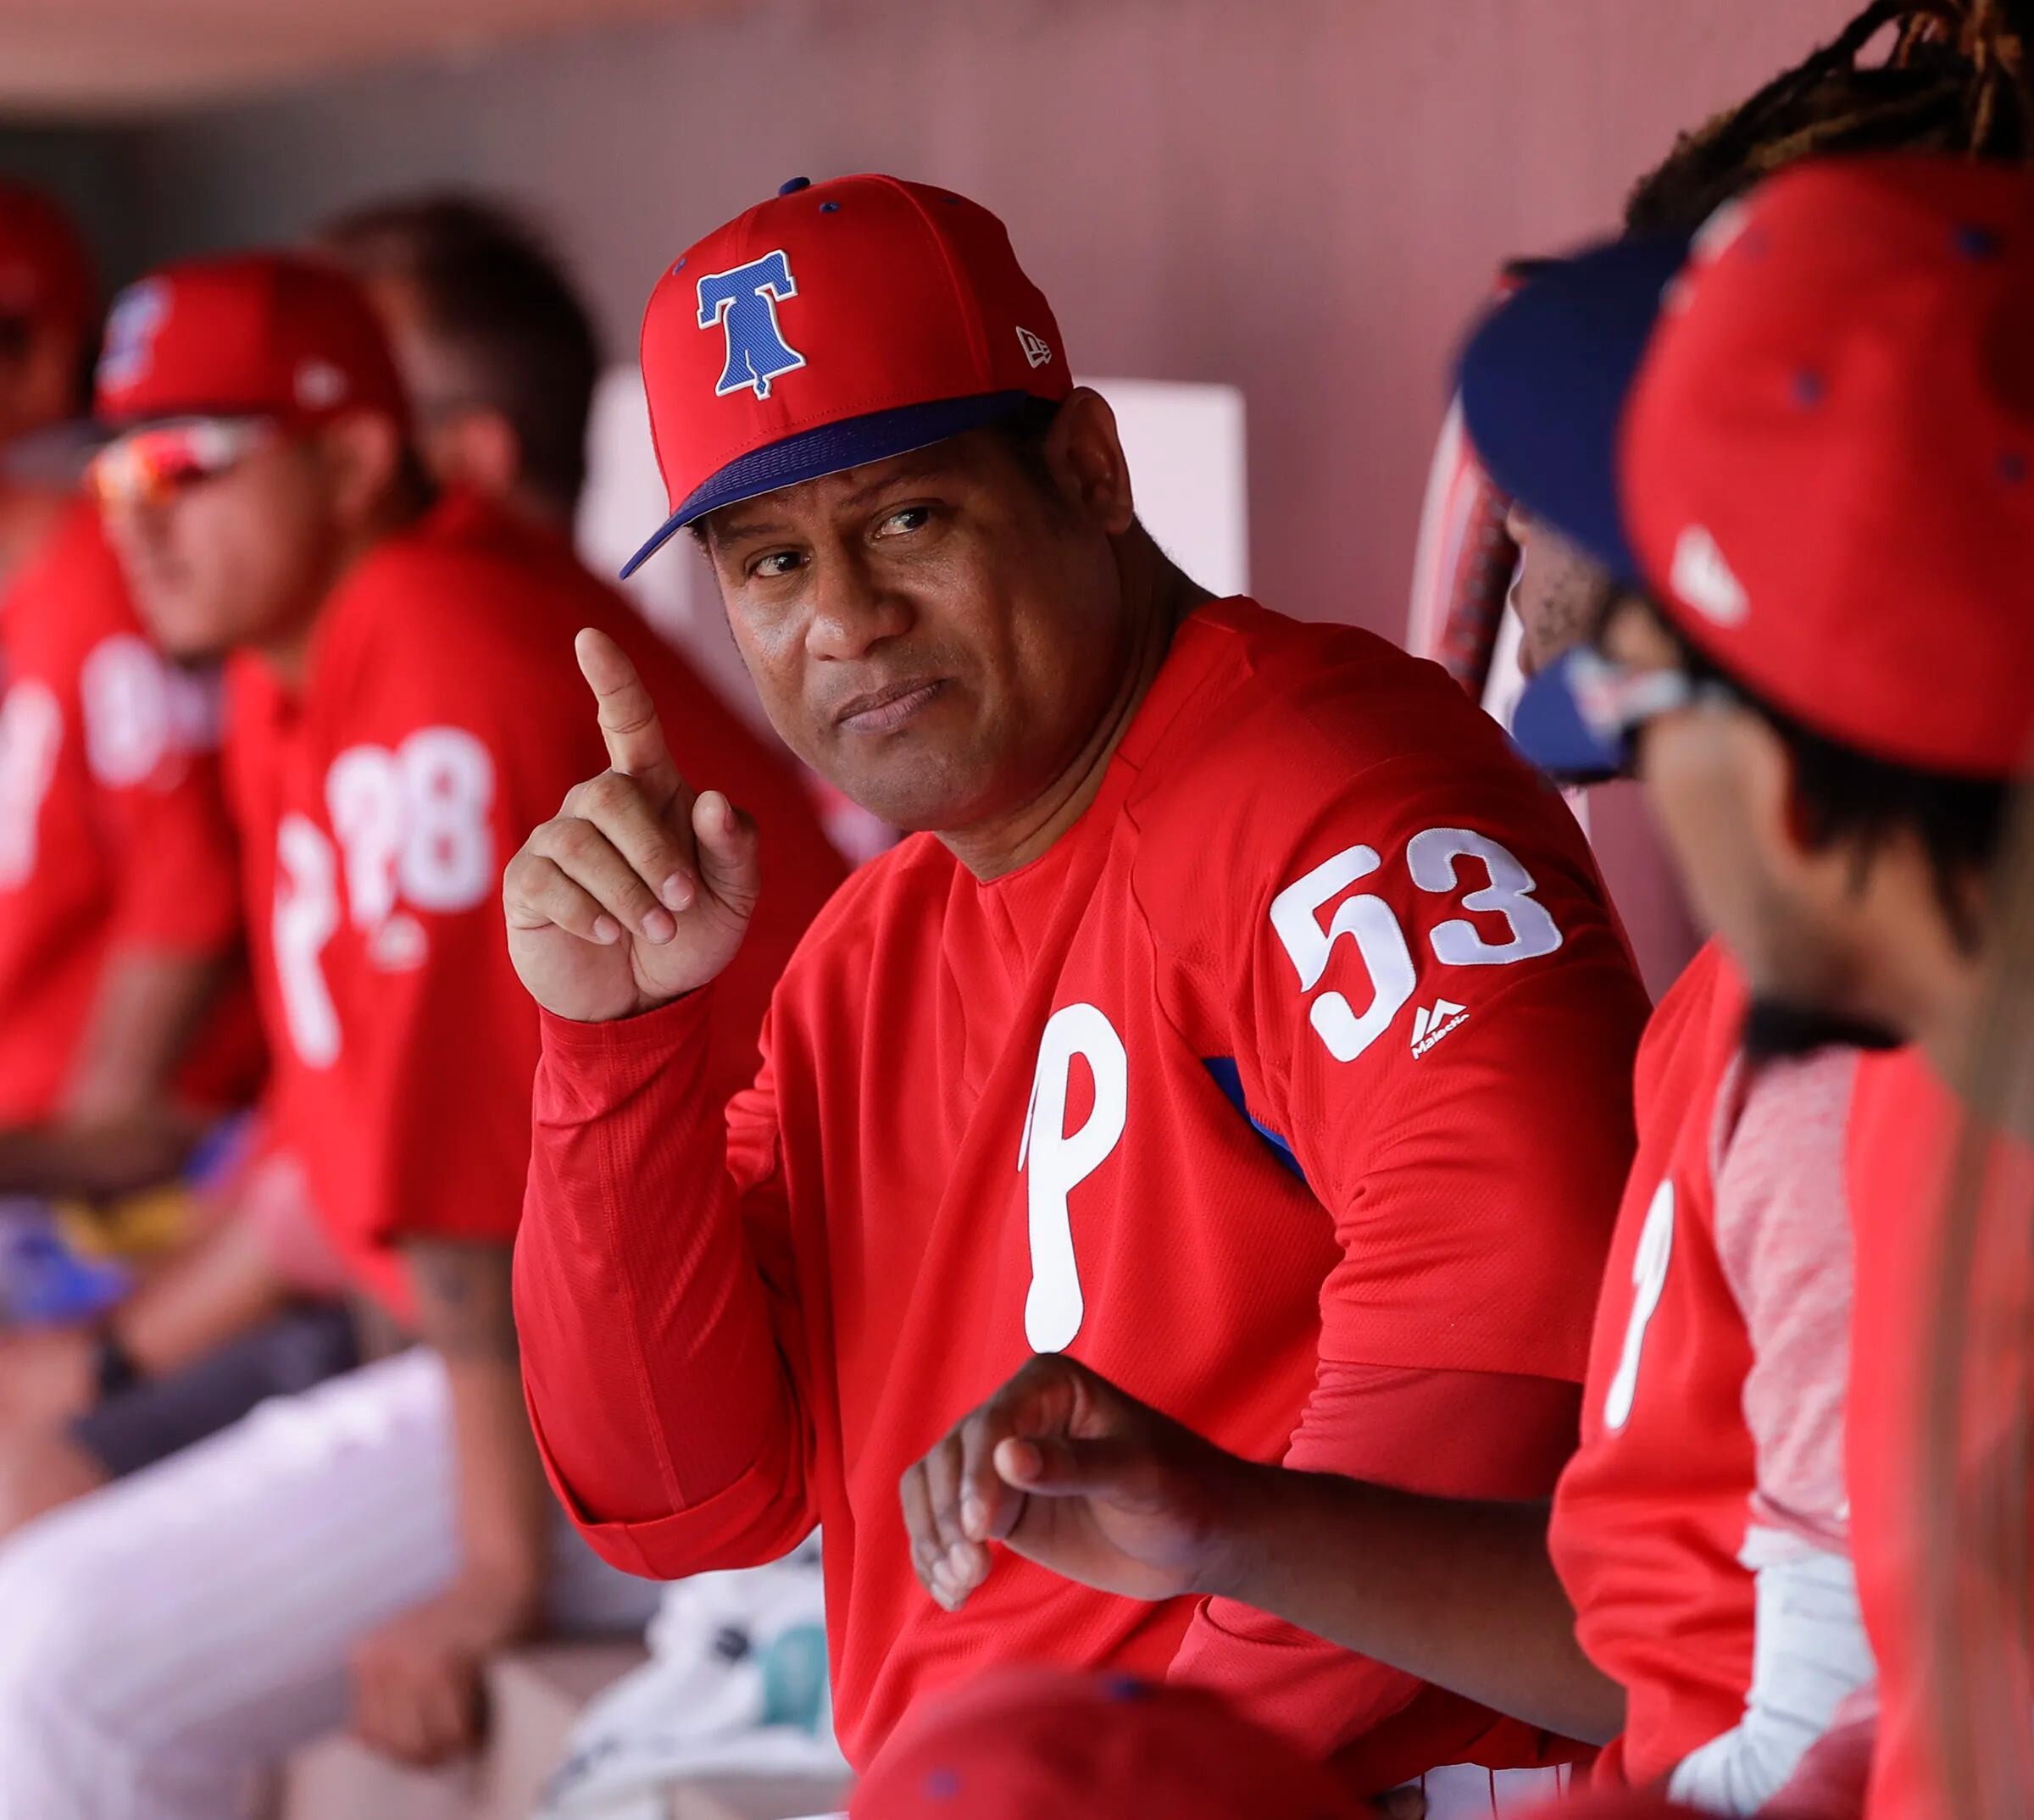 Phillies are big on Latin American players, but lack Latino superstars